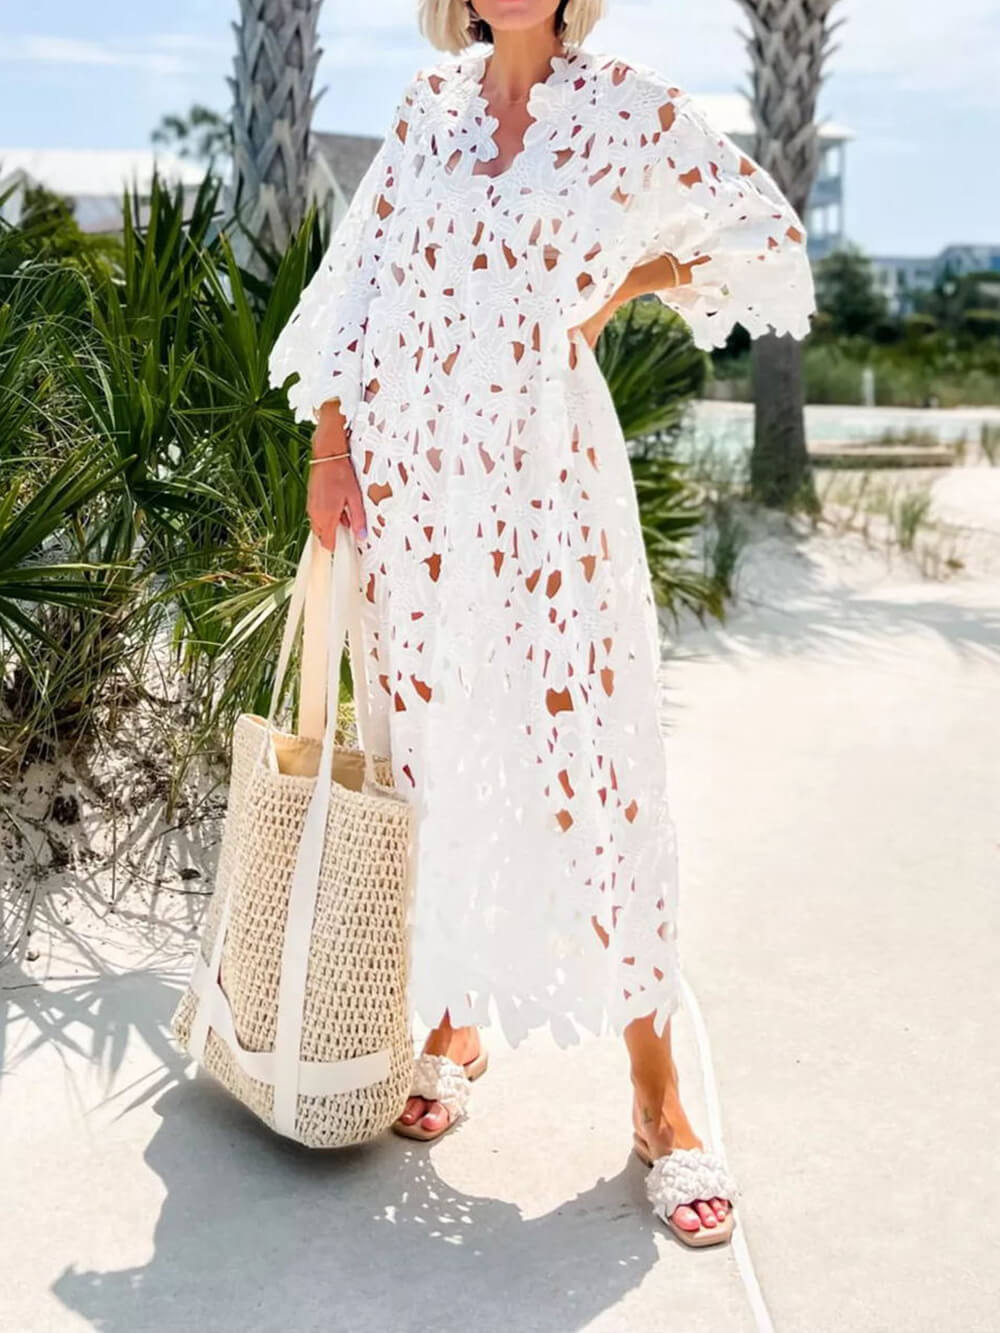 Floral Eyelet Lace Cover Up Beach Midi Dress